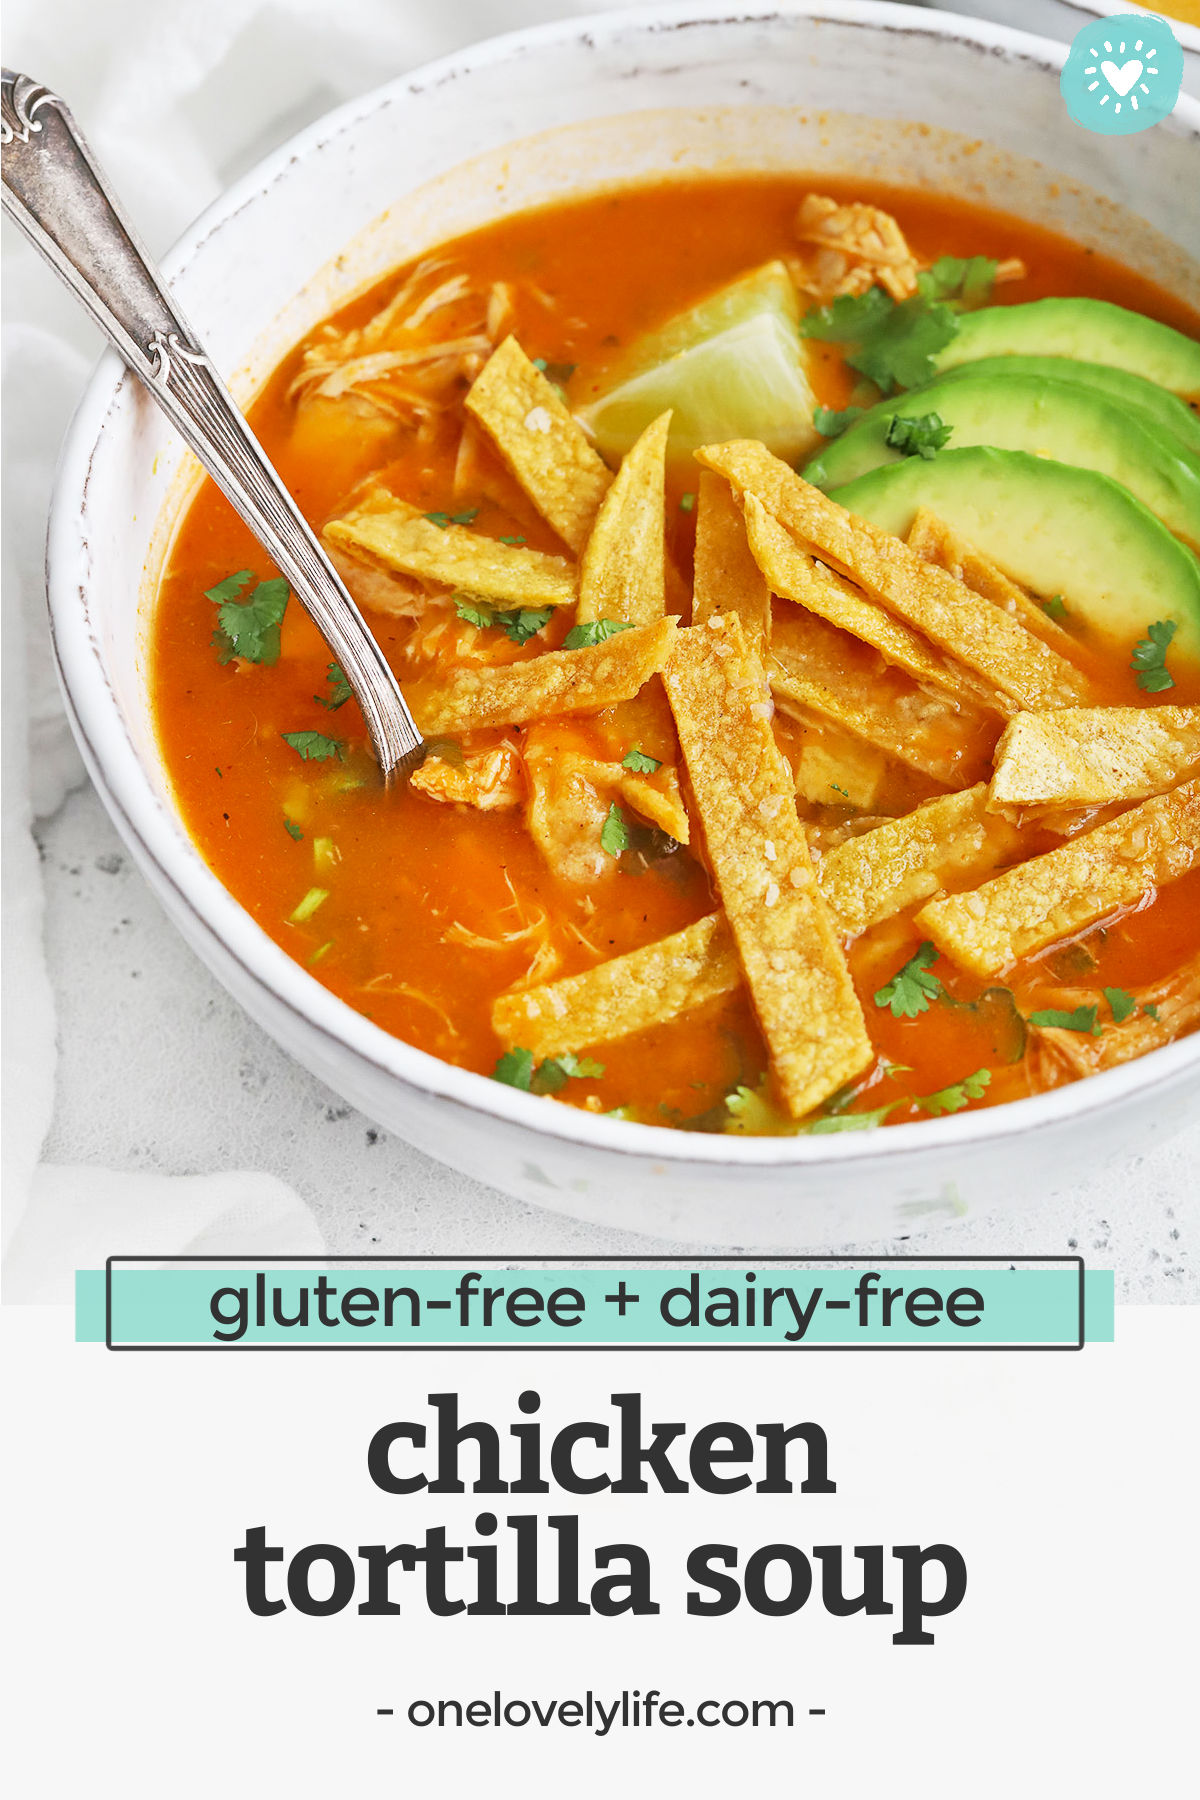 Chicken Tortilla Soup - Tender chicken in a savory, flavorful broth, topped with crispy baked tortilla strips and allll the goodies! (Gluten-Free + Paleo-Friendly) // Chicken Tortilla Soup Recipe // Tortilla Soup // Healthy Soup // #tortillasoup #chickensoup #glutenfree